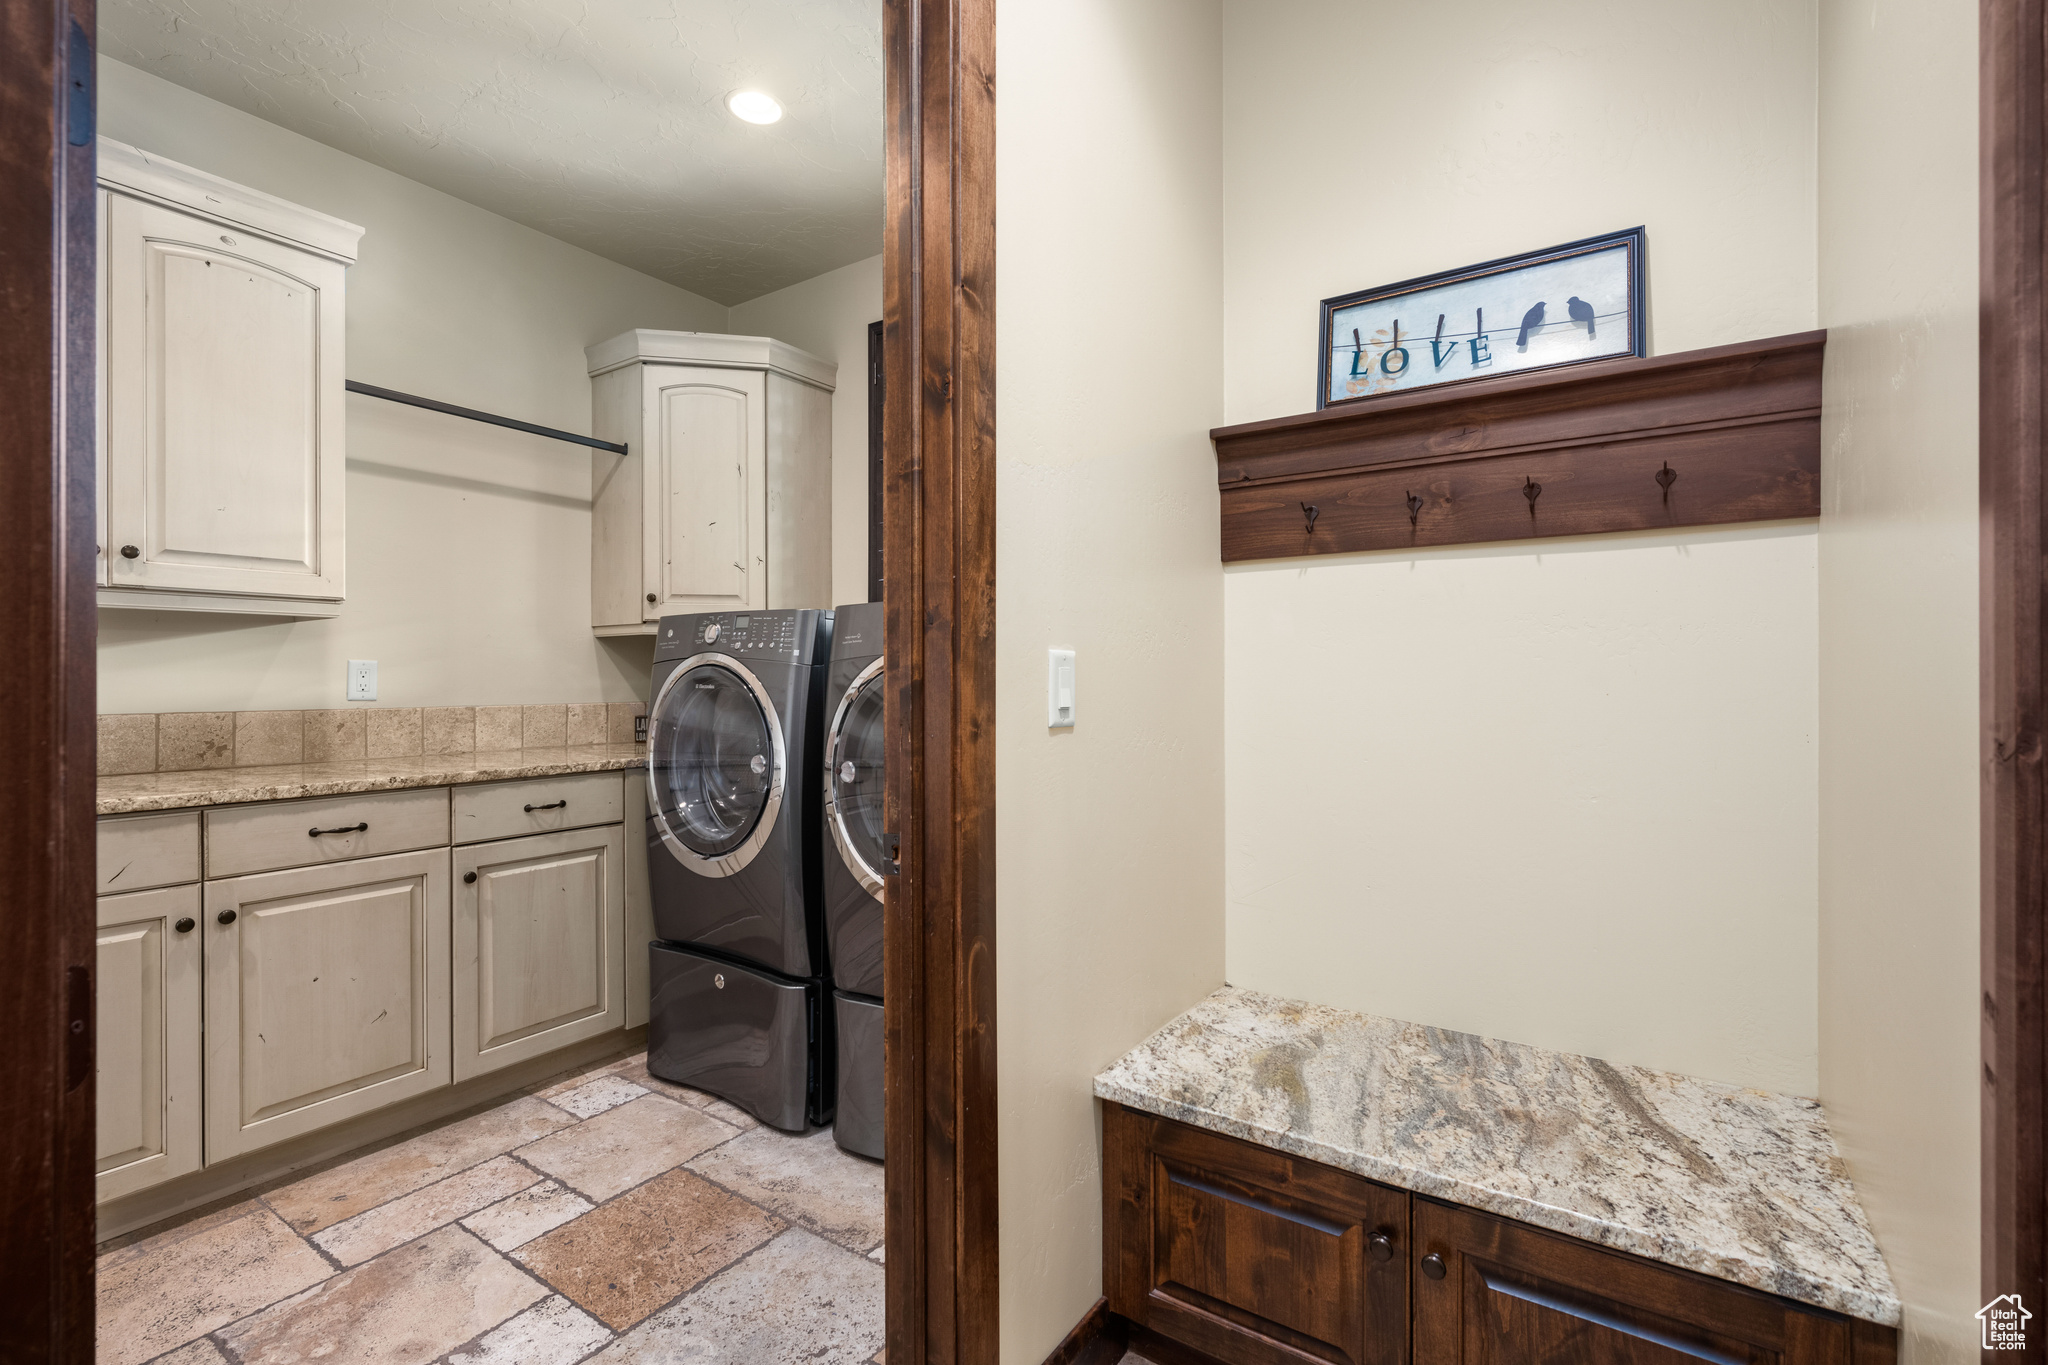 Laundry room with cabinets, independent washer and dryer, and light tile floors